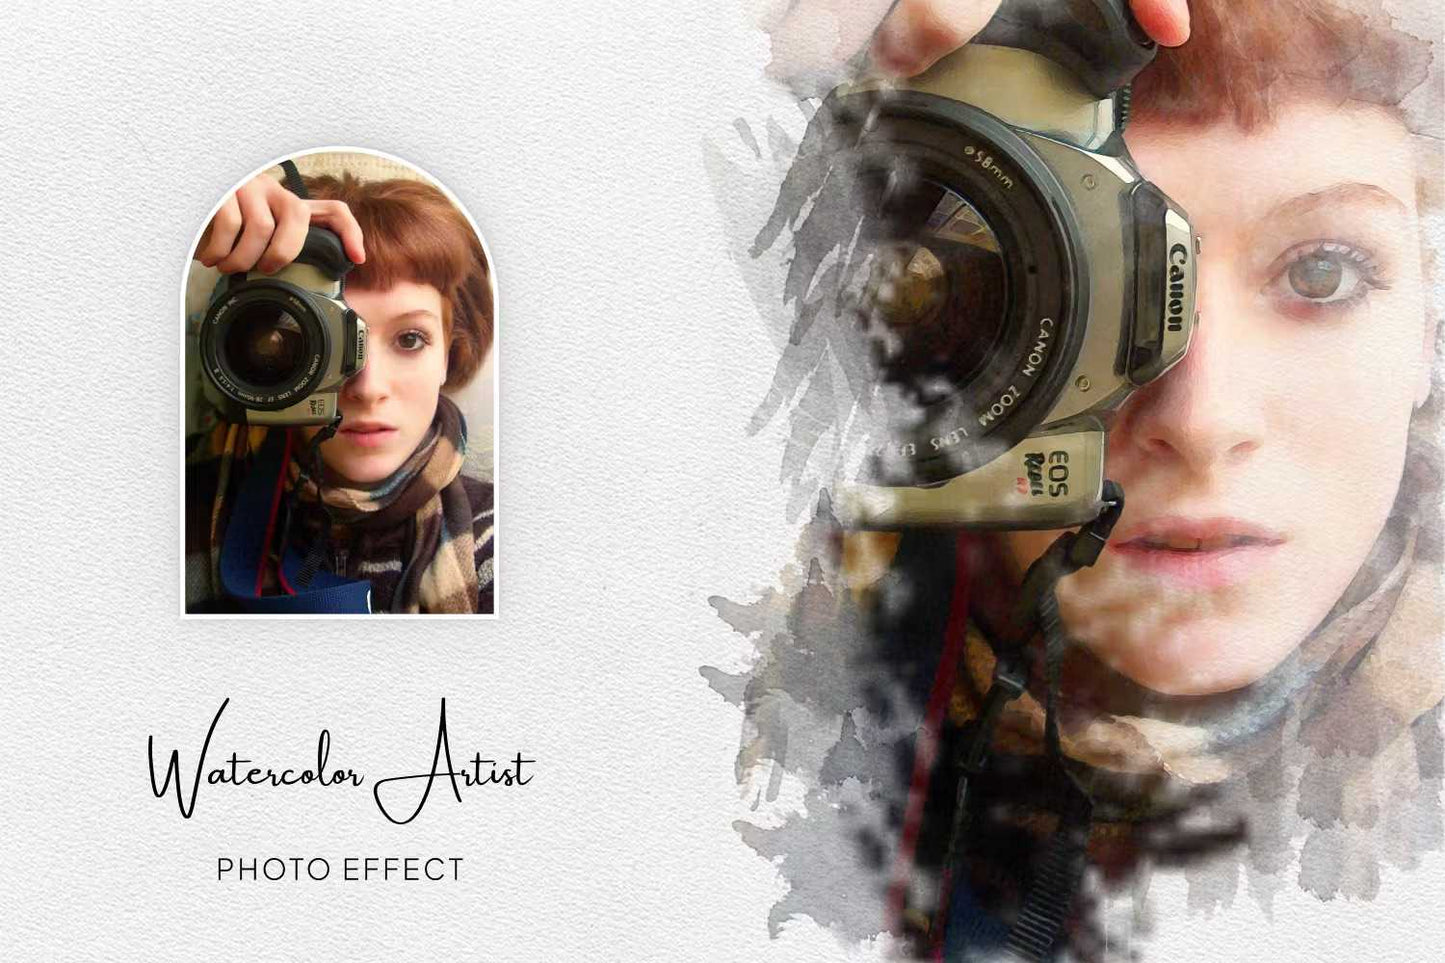 26-In-1 Matchless Photoshop Effects Bundle